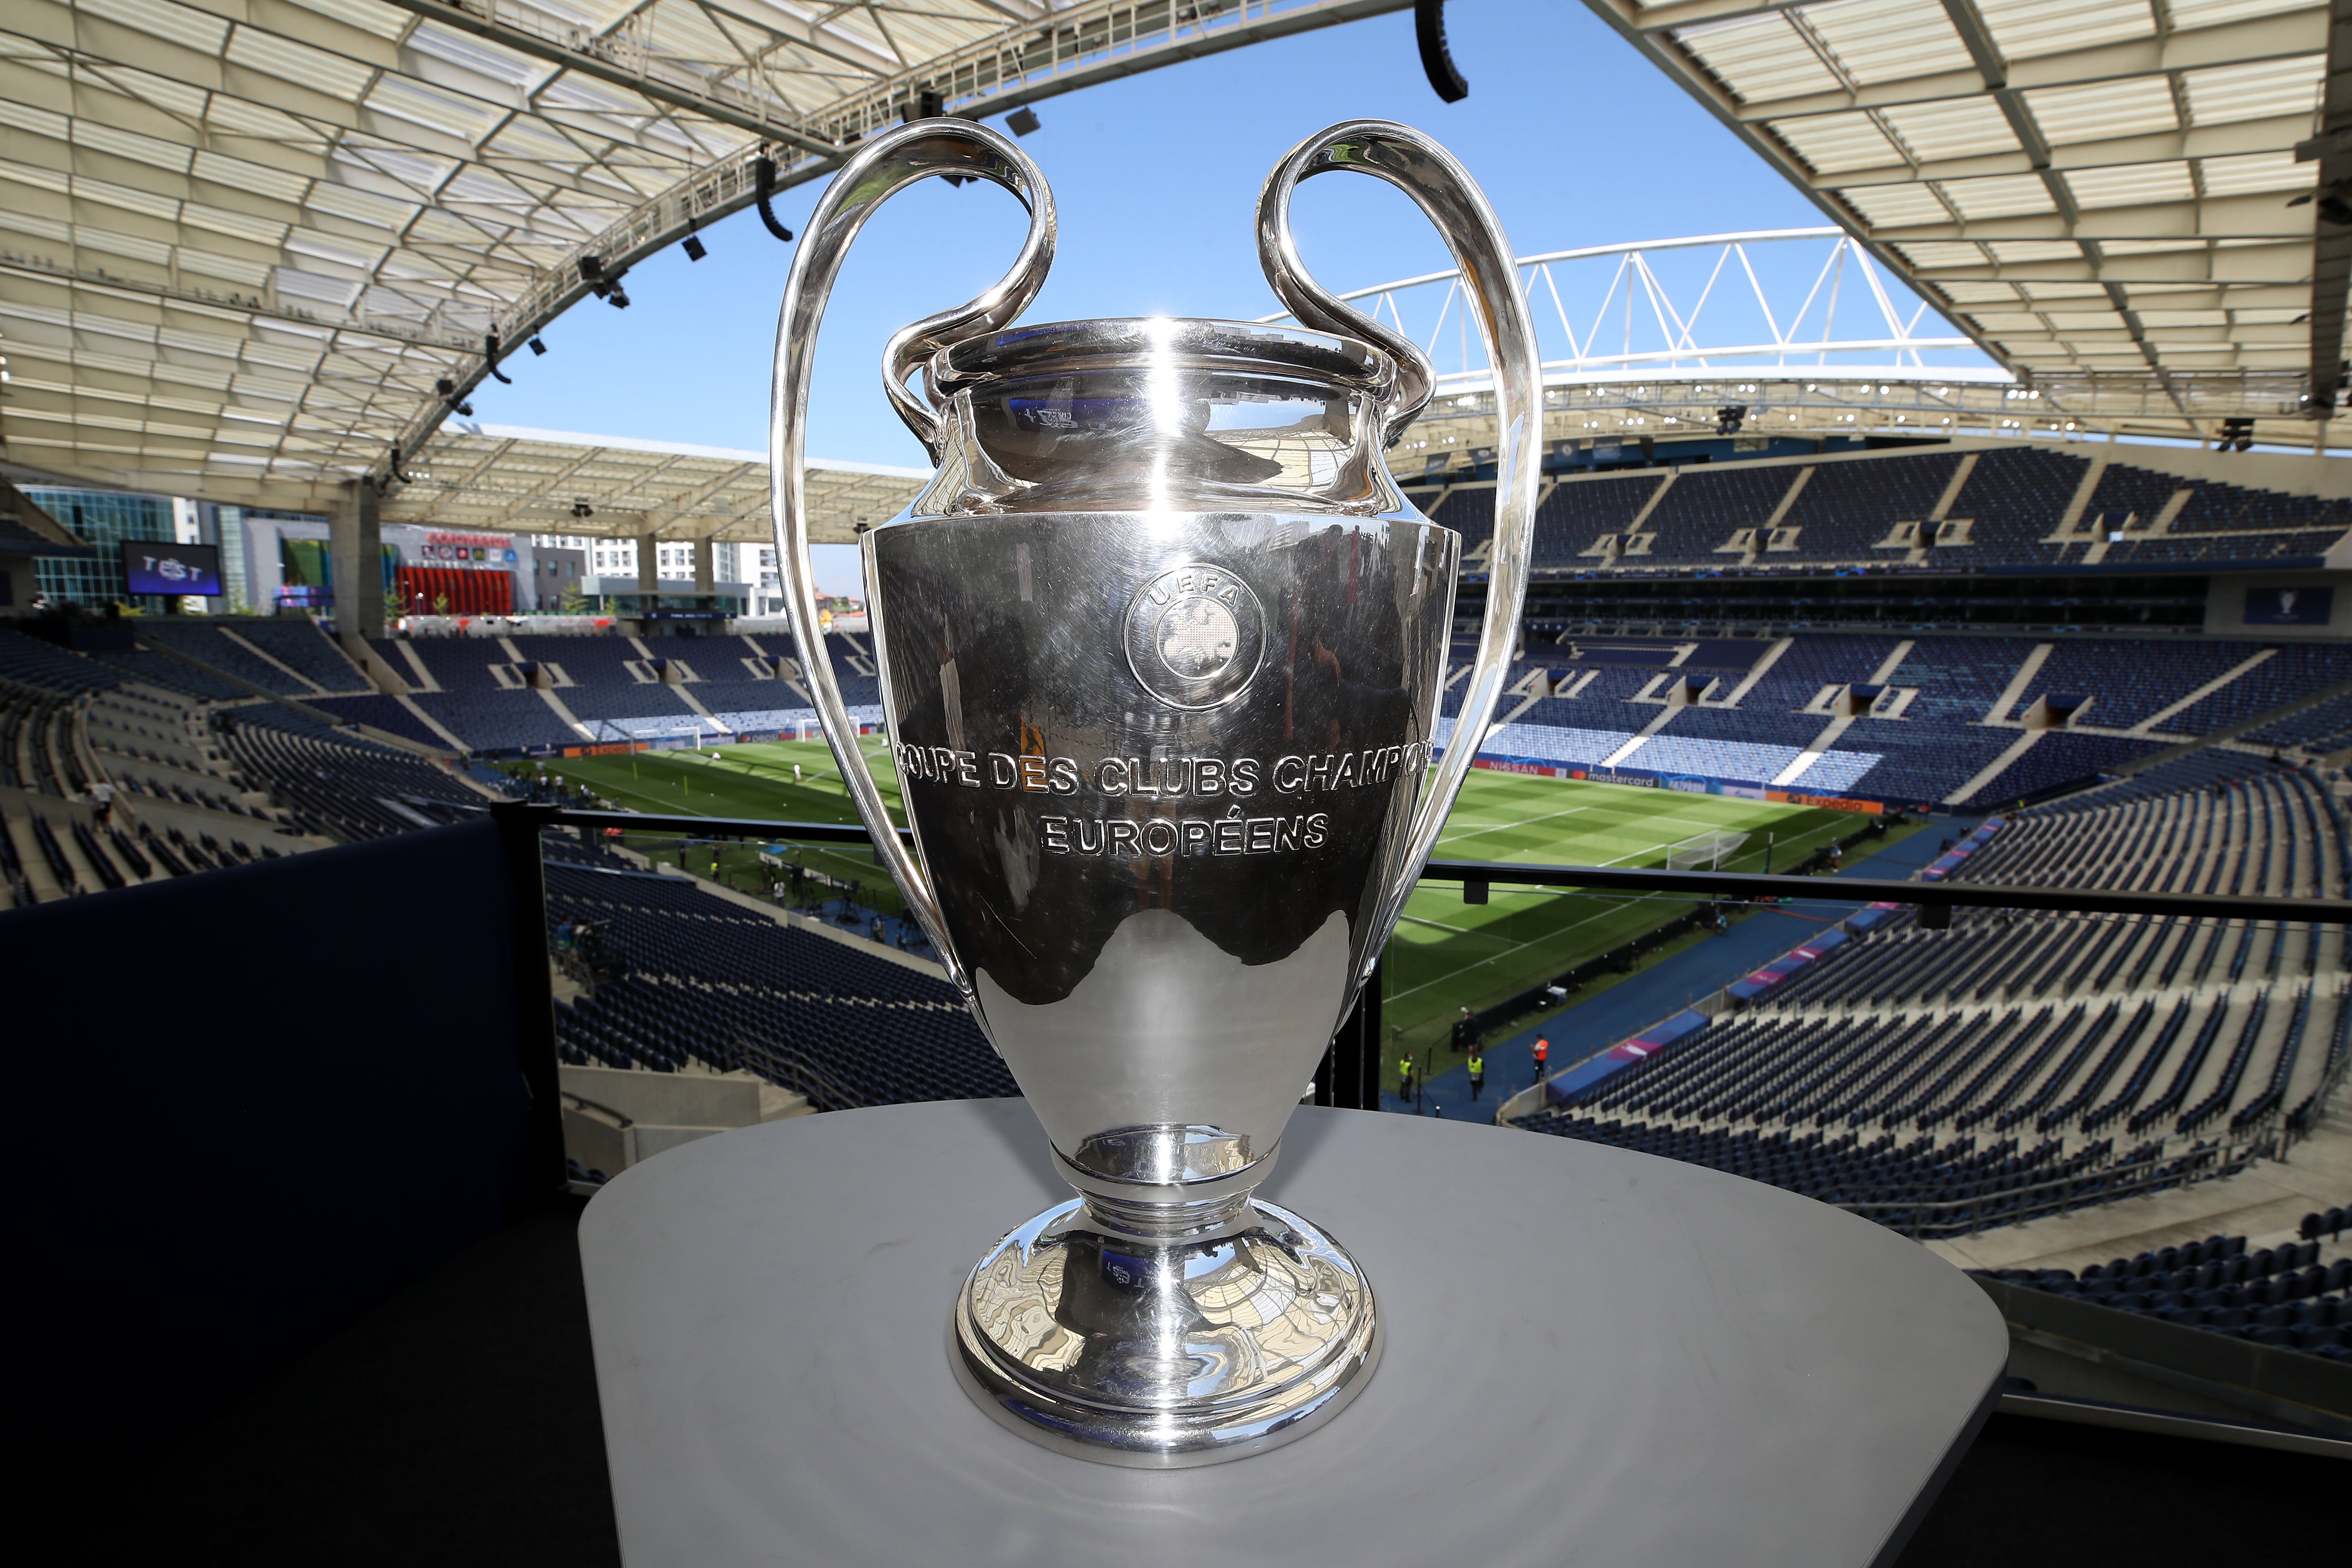 The Champions League is set to be broadcast on Amazon Prime Video in the UK